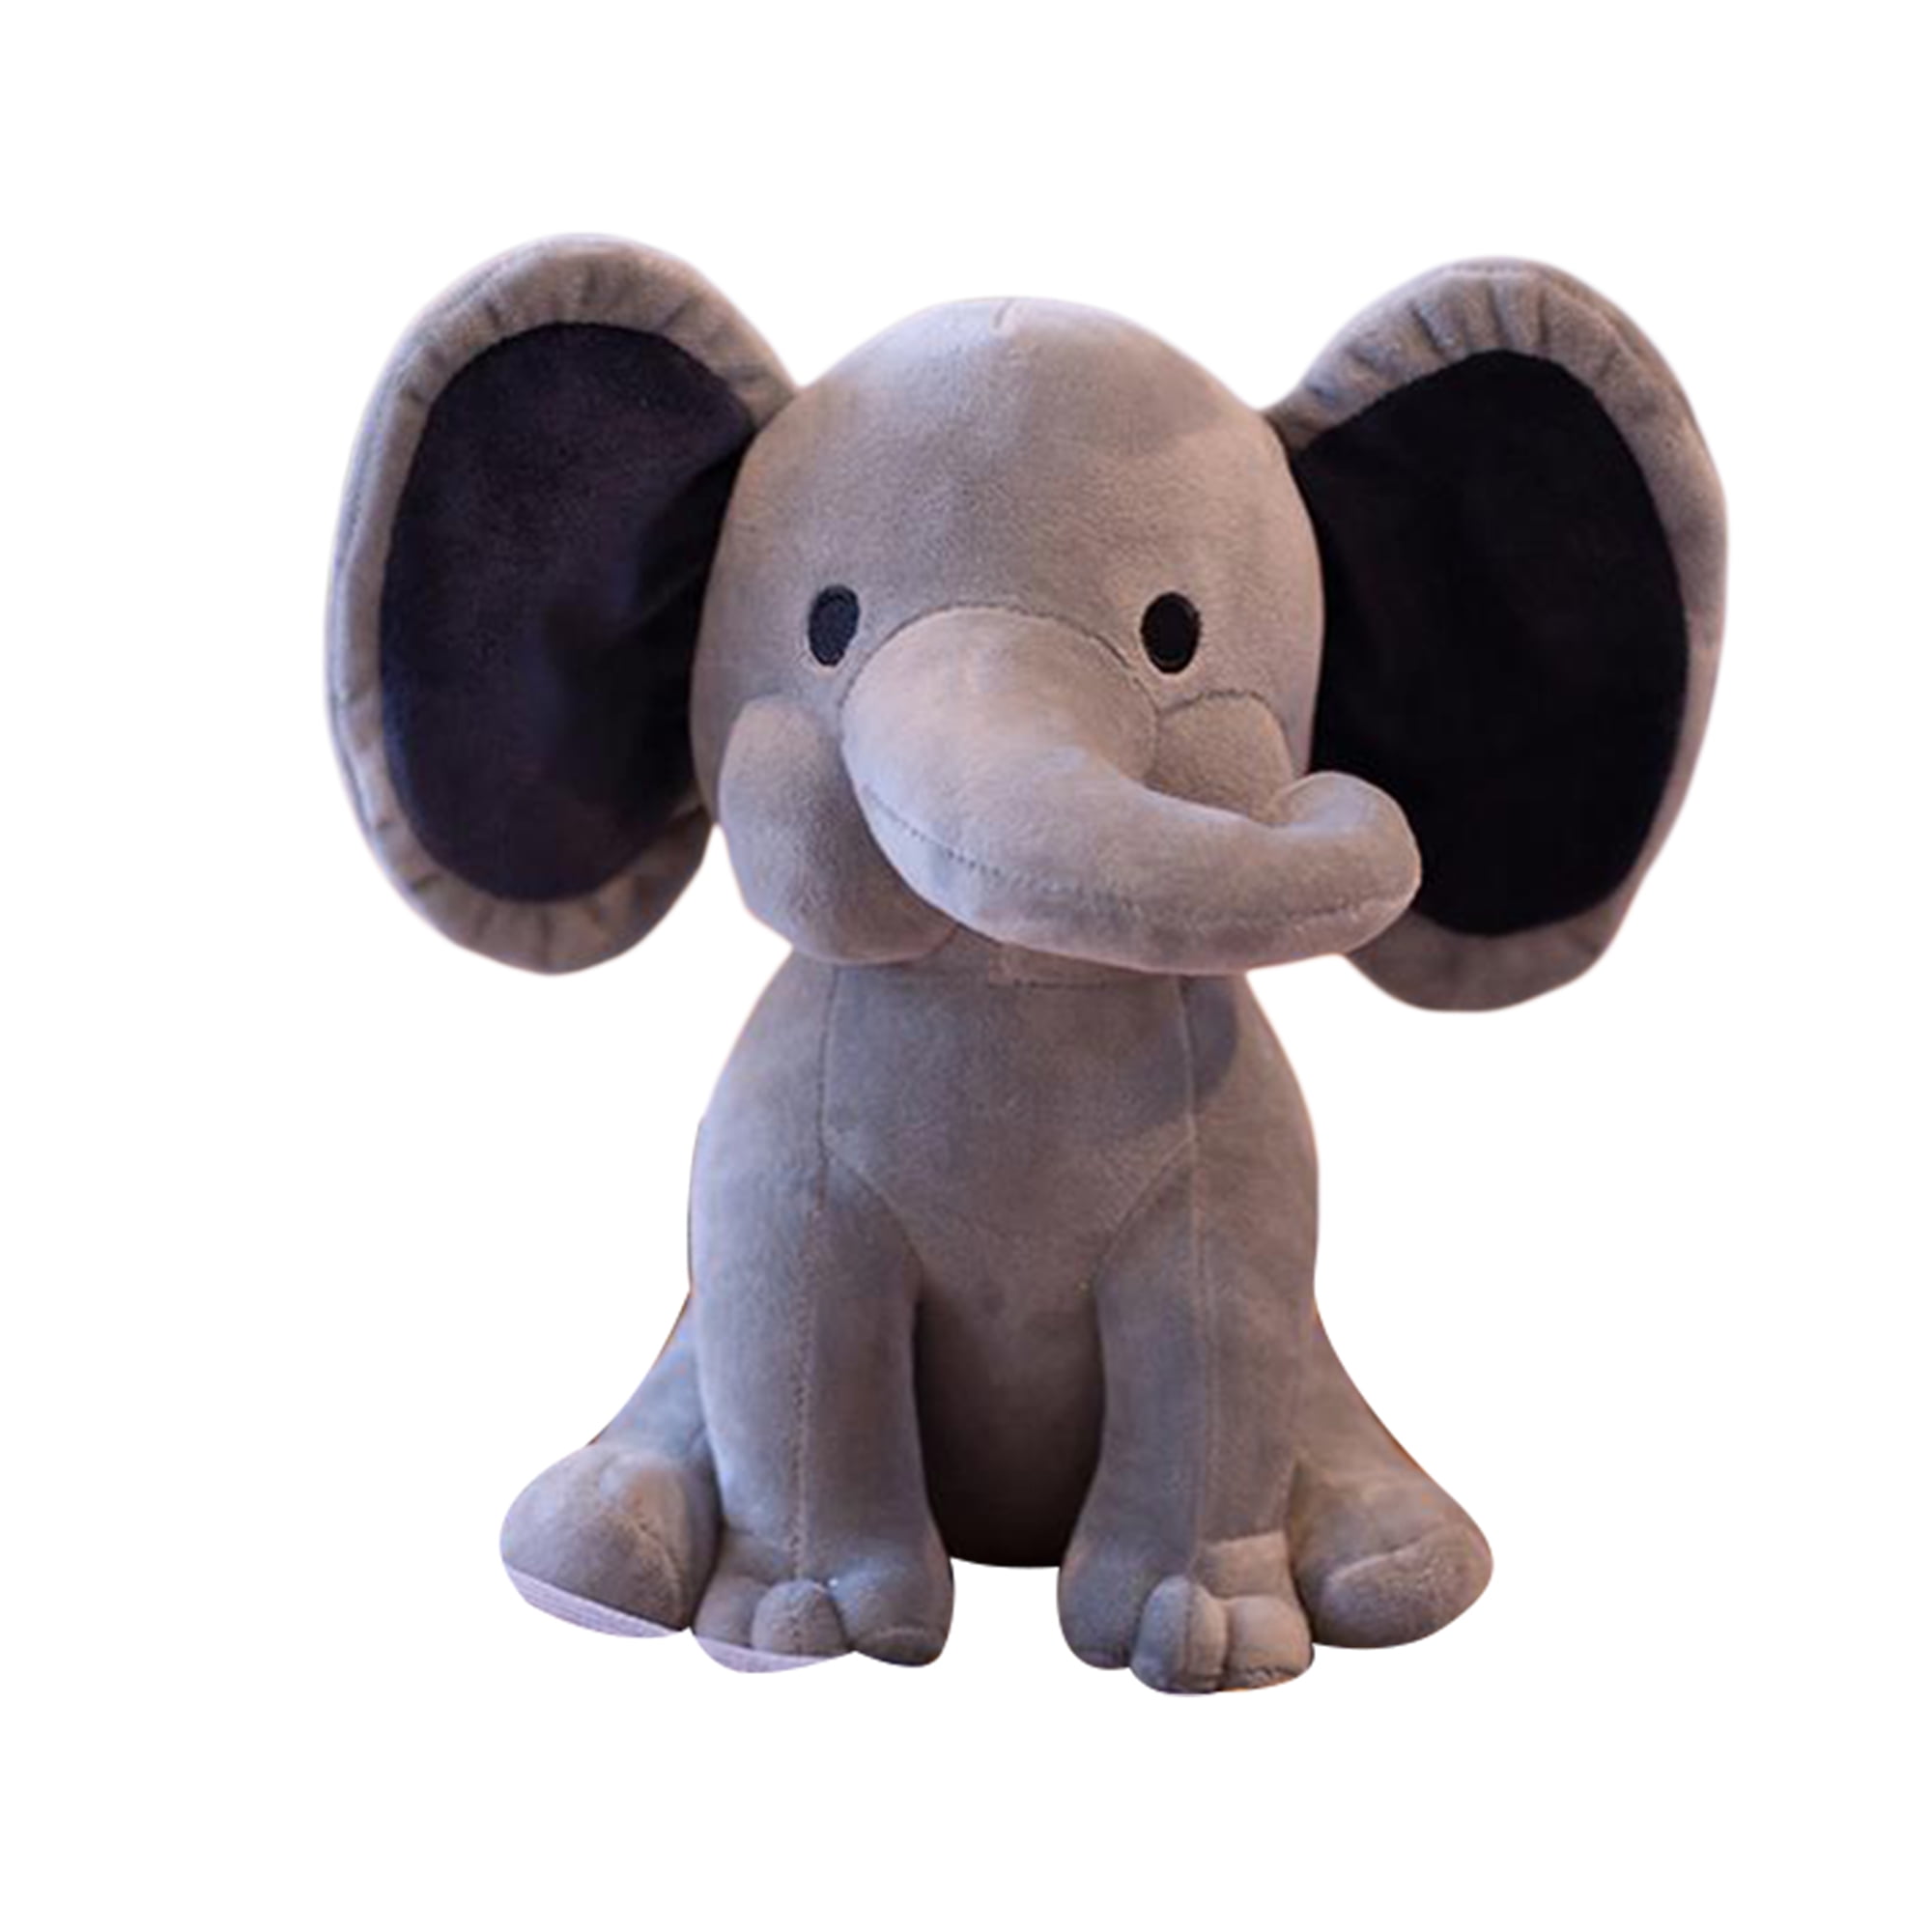 Kids 9.8 inches Elephant Doll Plush Stuffed Toy for Sleeping Comfortable 